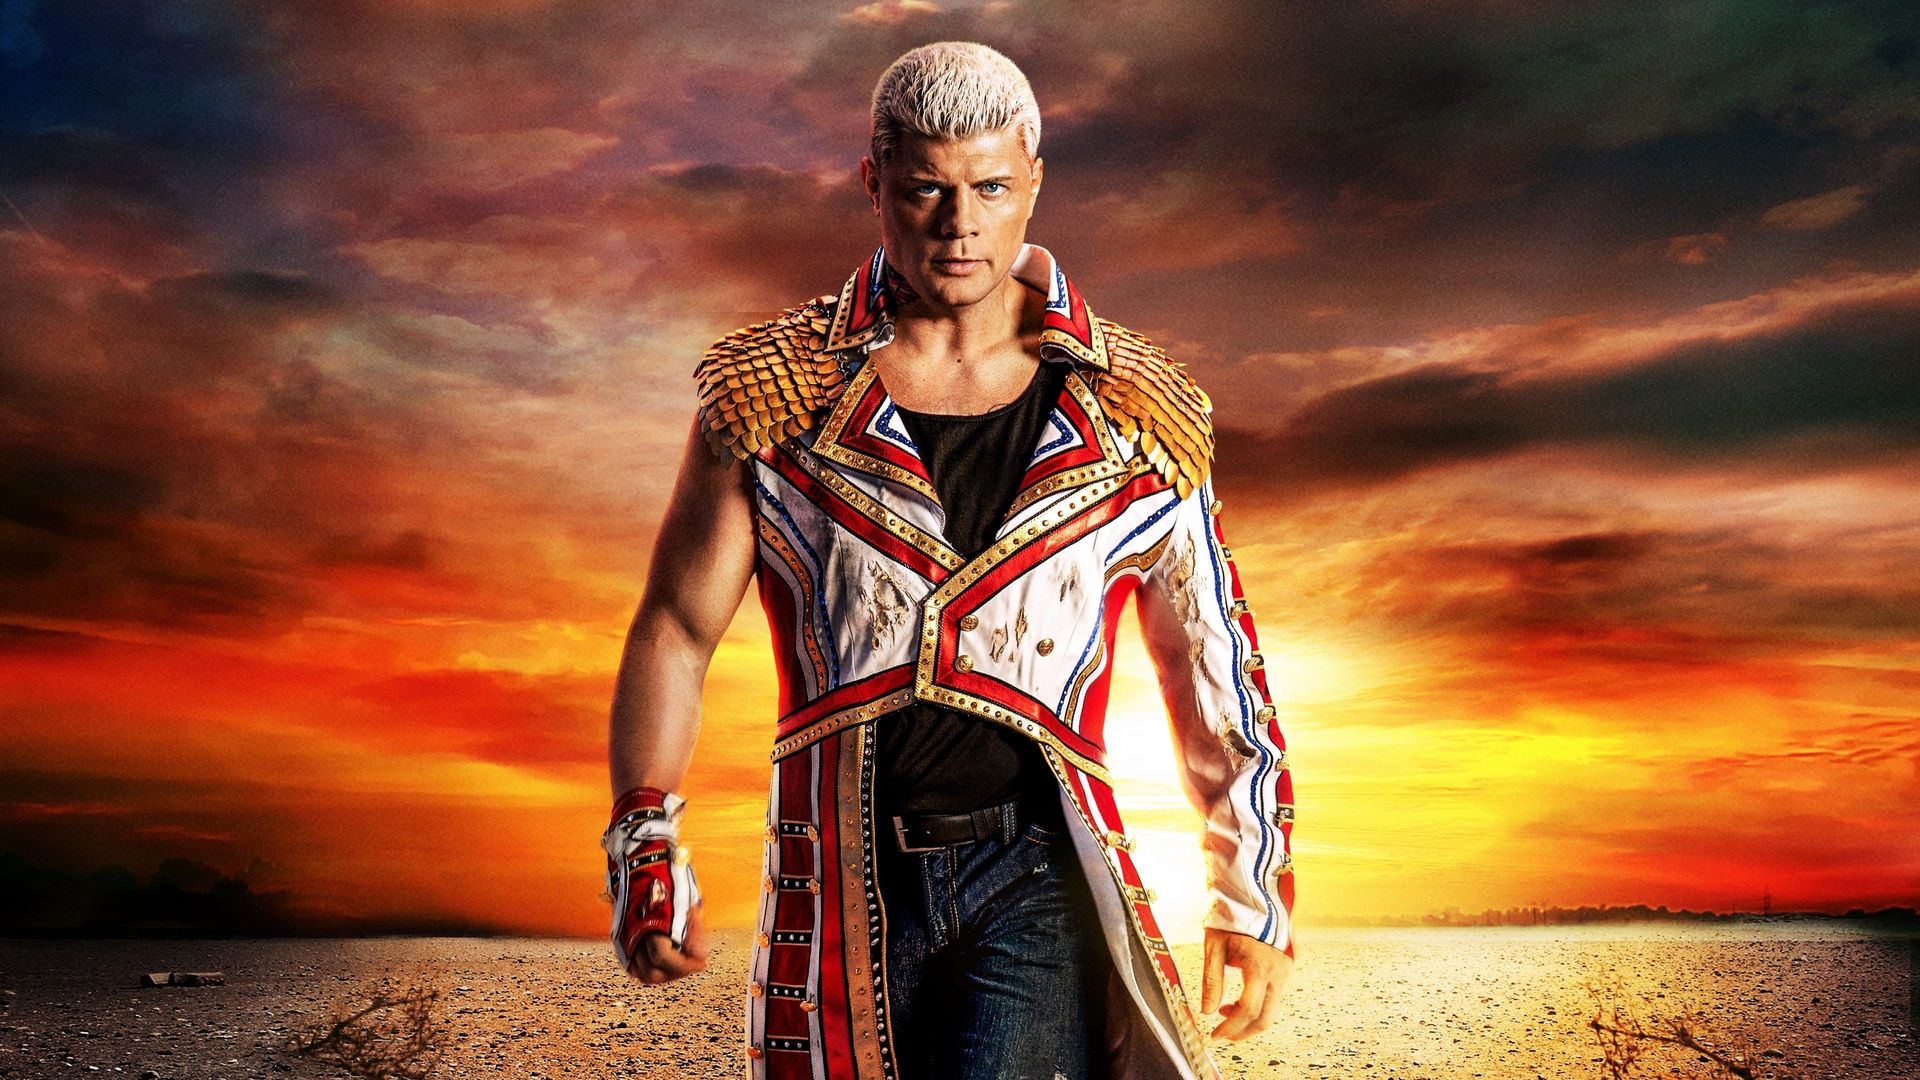 American Nightmare: Becoming Cody Rhodes background